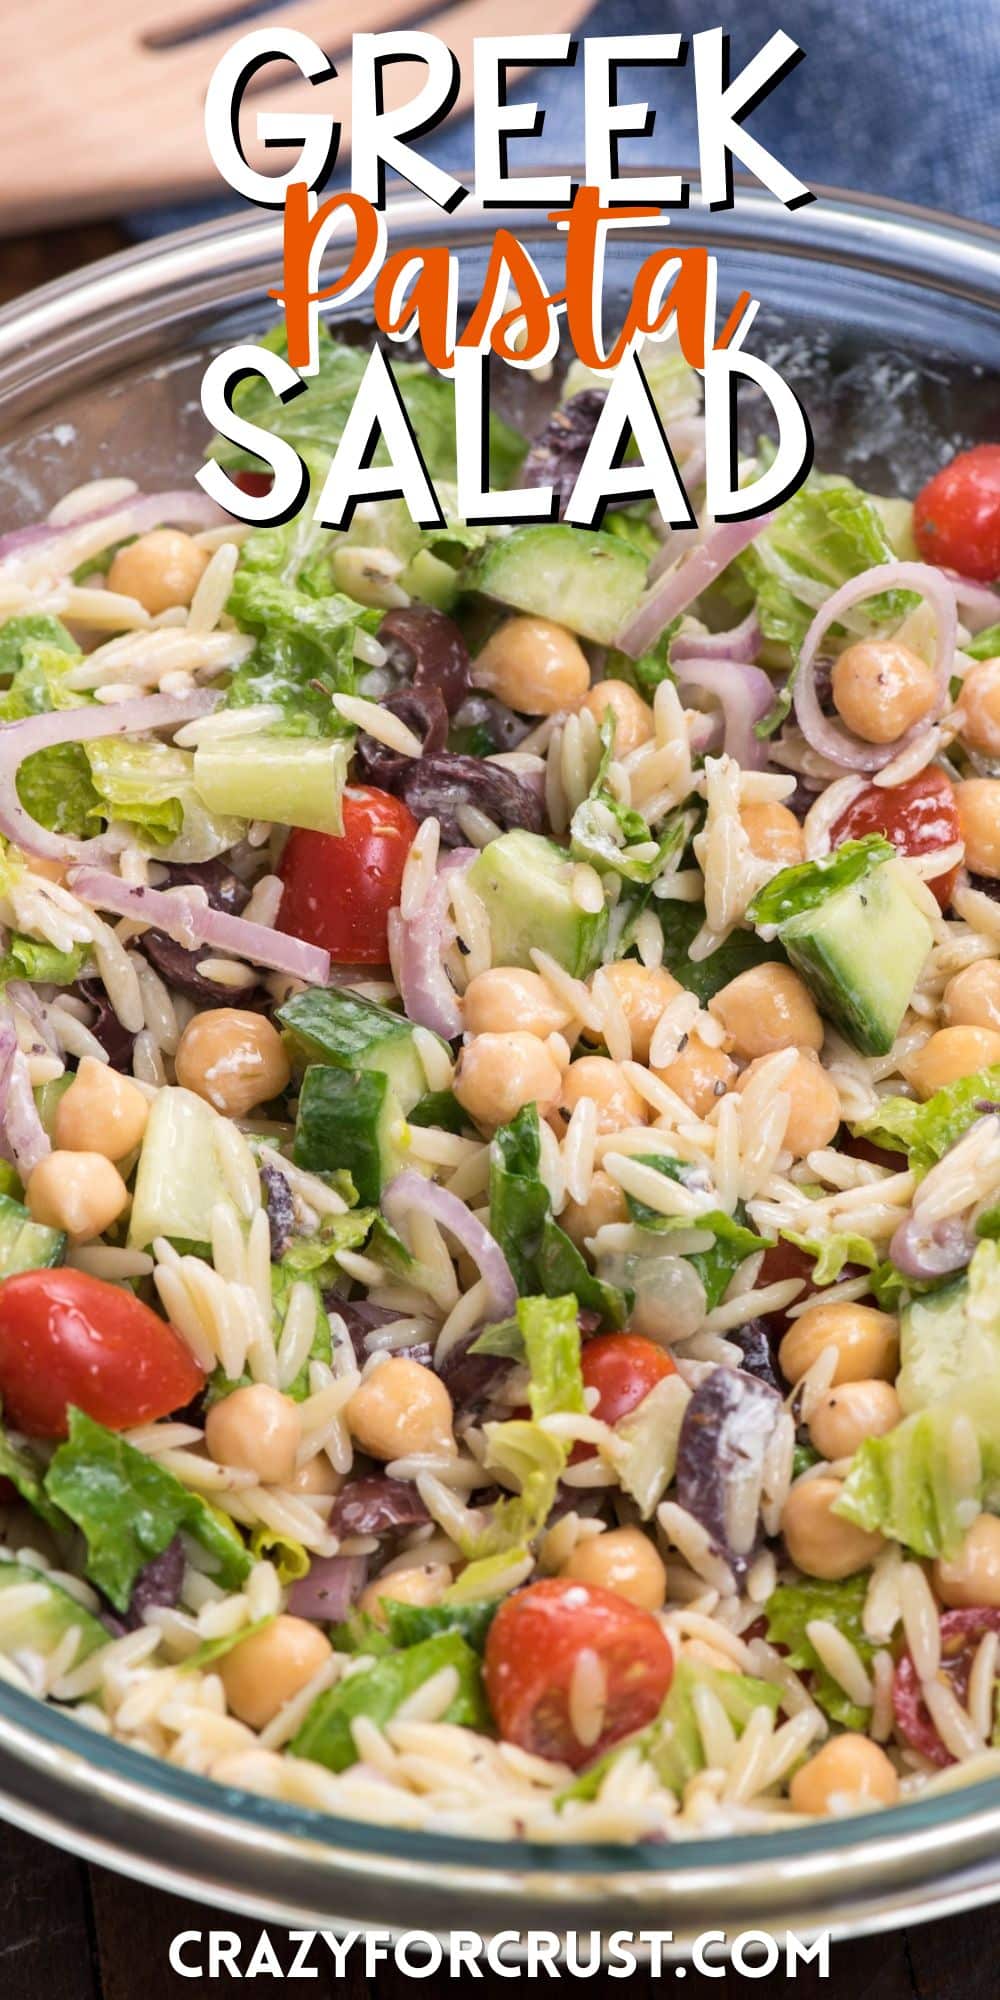 salad mixed together with dressing in a clear bowl with words on the image.